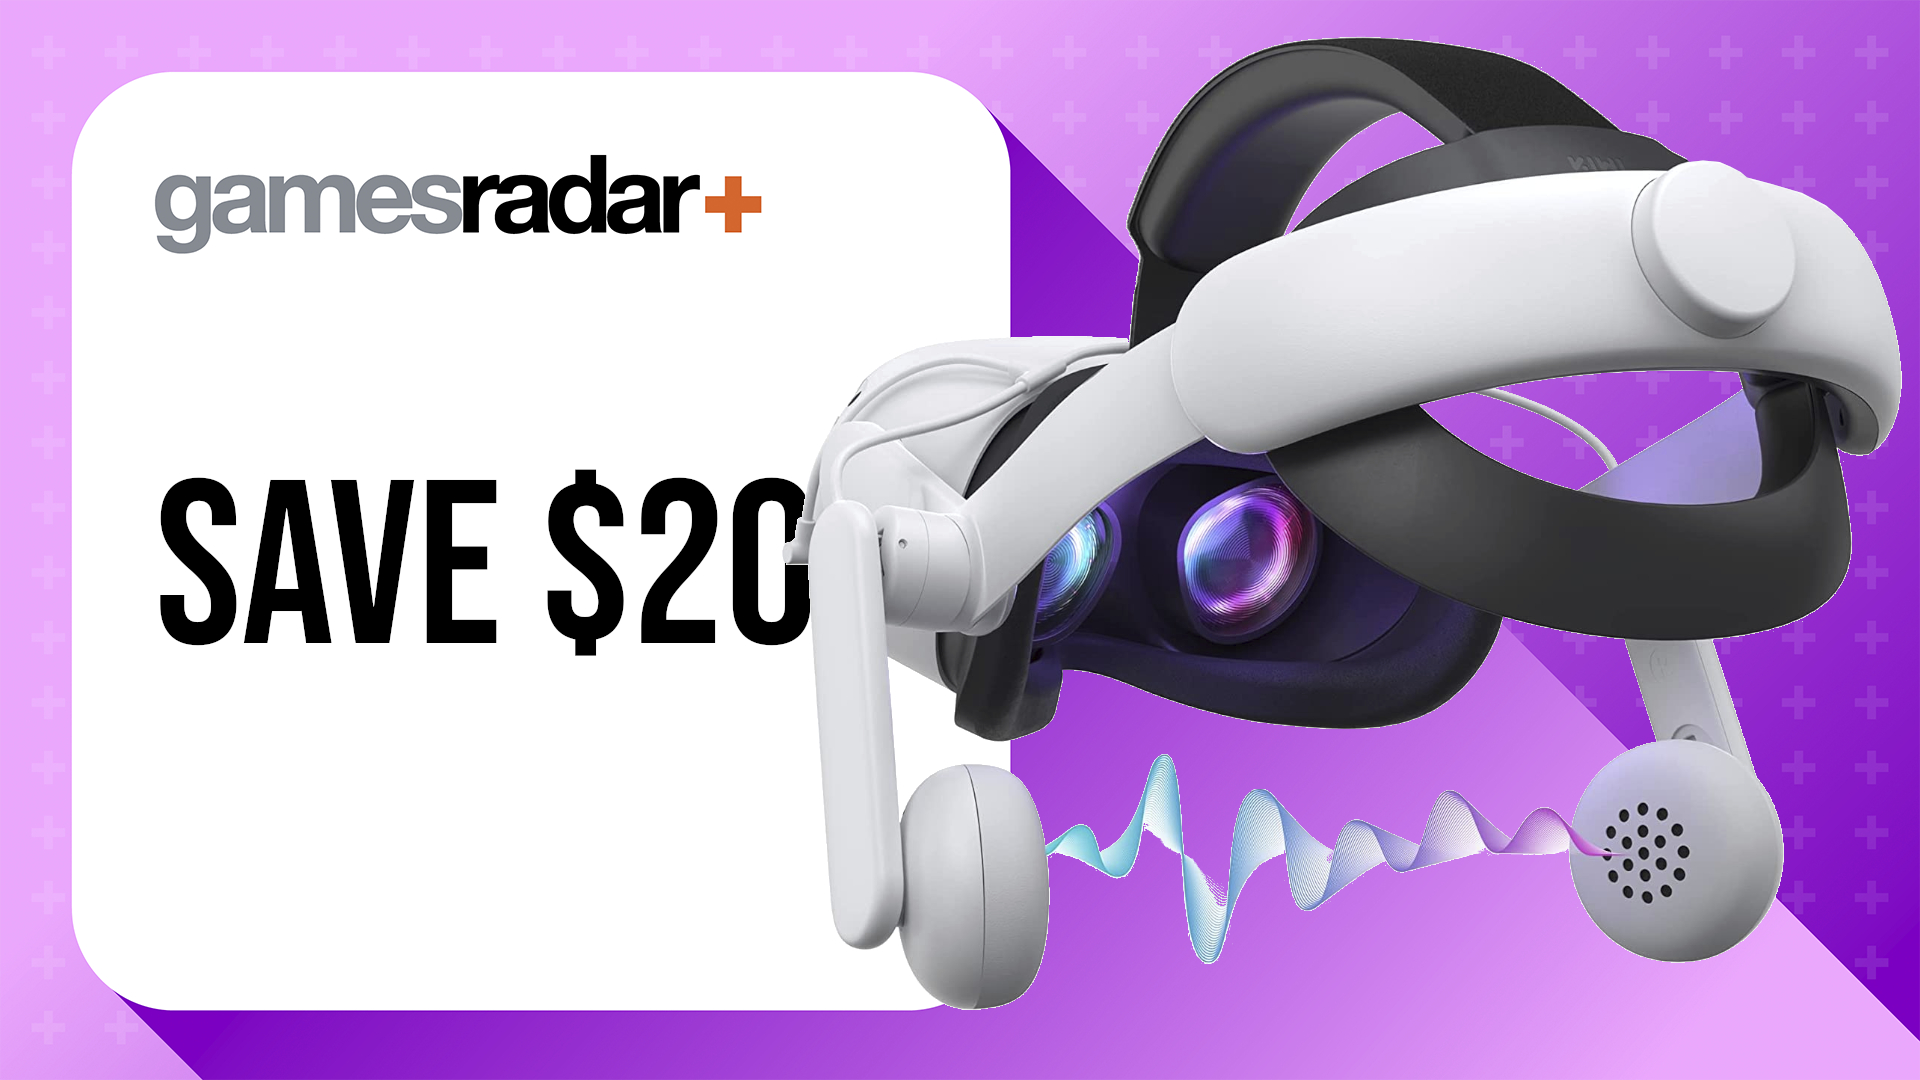 Black Friday Oculus Quest 2 deals with Kiwi head strap with headphones